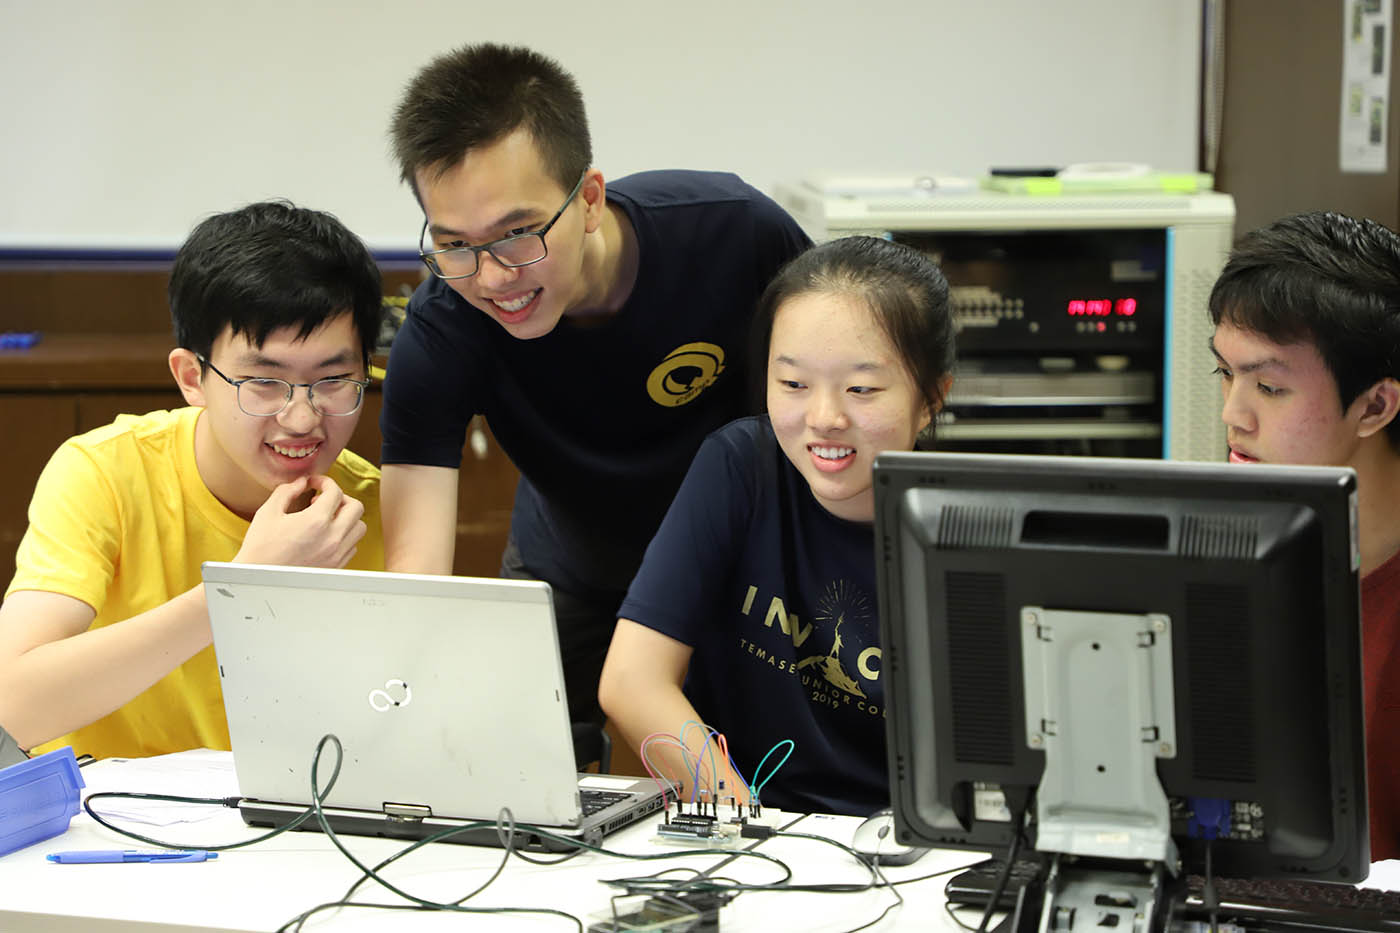 Students pictured with facilitor at the Q Camp workshop, shown working at laptops to control QKD equipment.